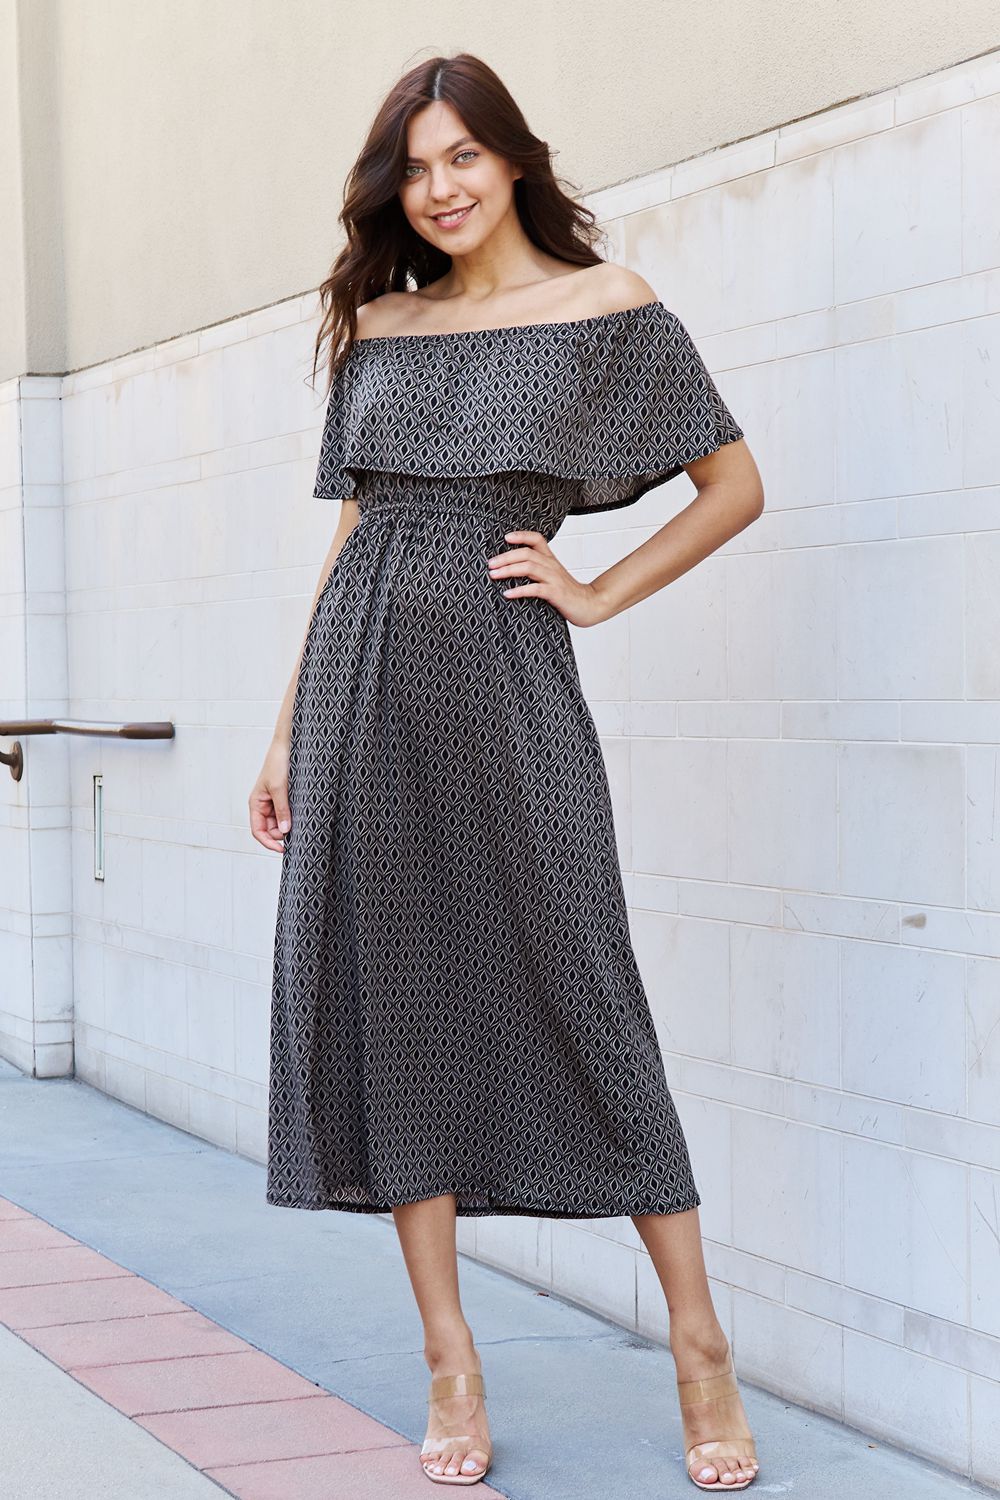 Uylee's Boutique My Best Angle Geometric Pattern Off The Shoulder Midi Dress in Black